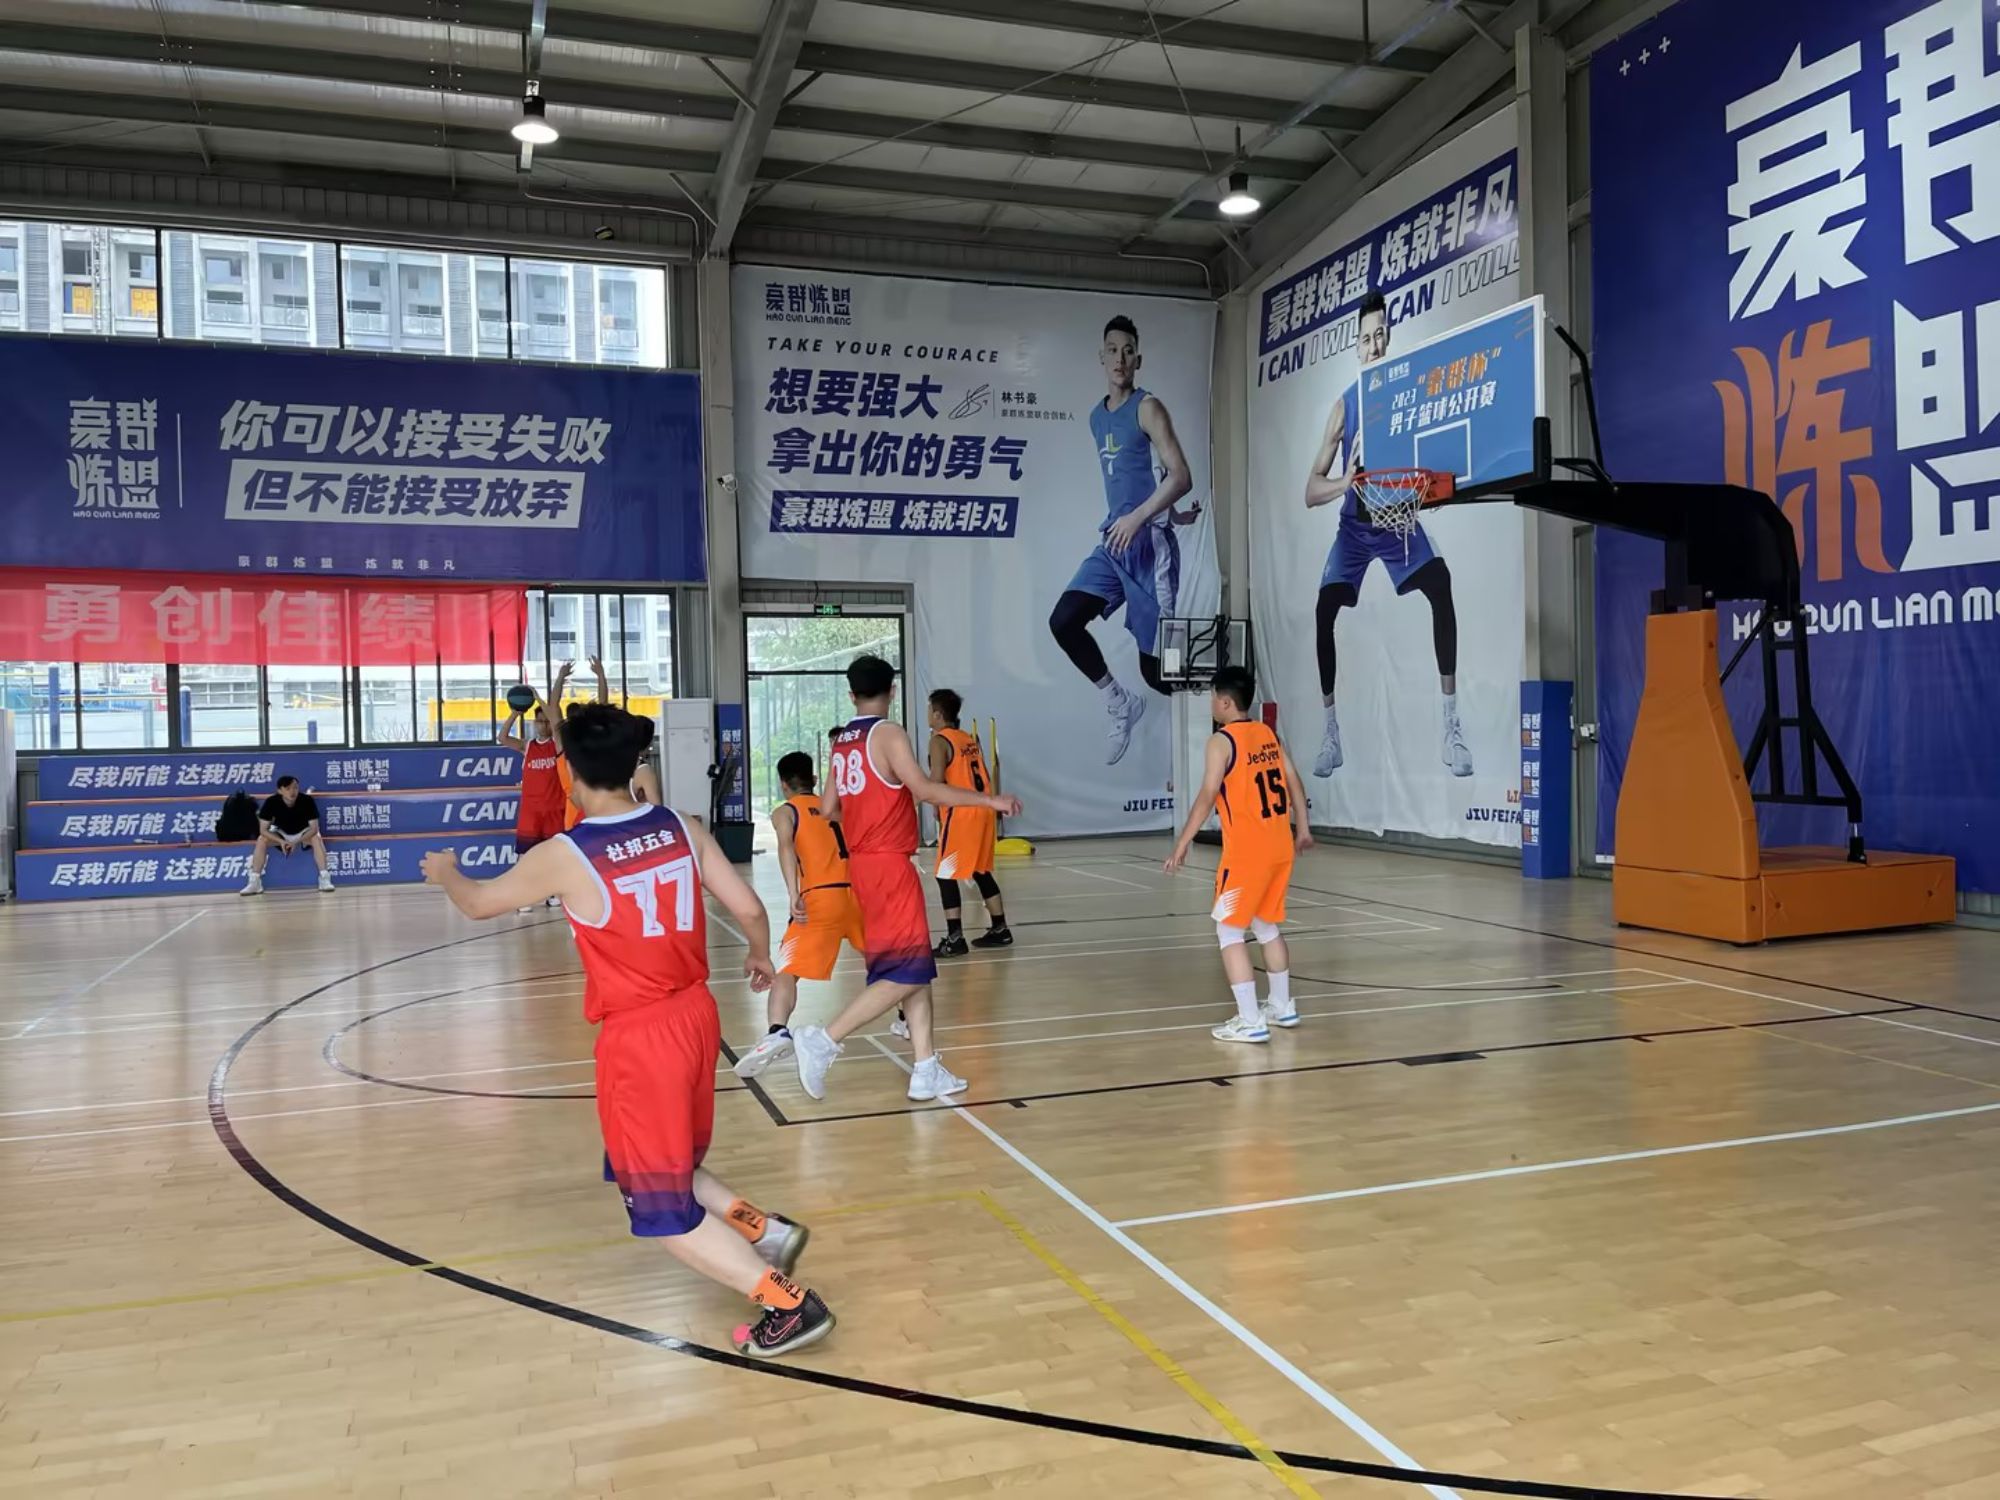 Love life, Love work, Love ROEASY, Basket competition is on the going for Guangdong Hardware Industry 